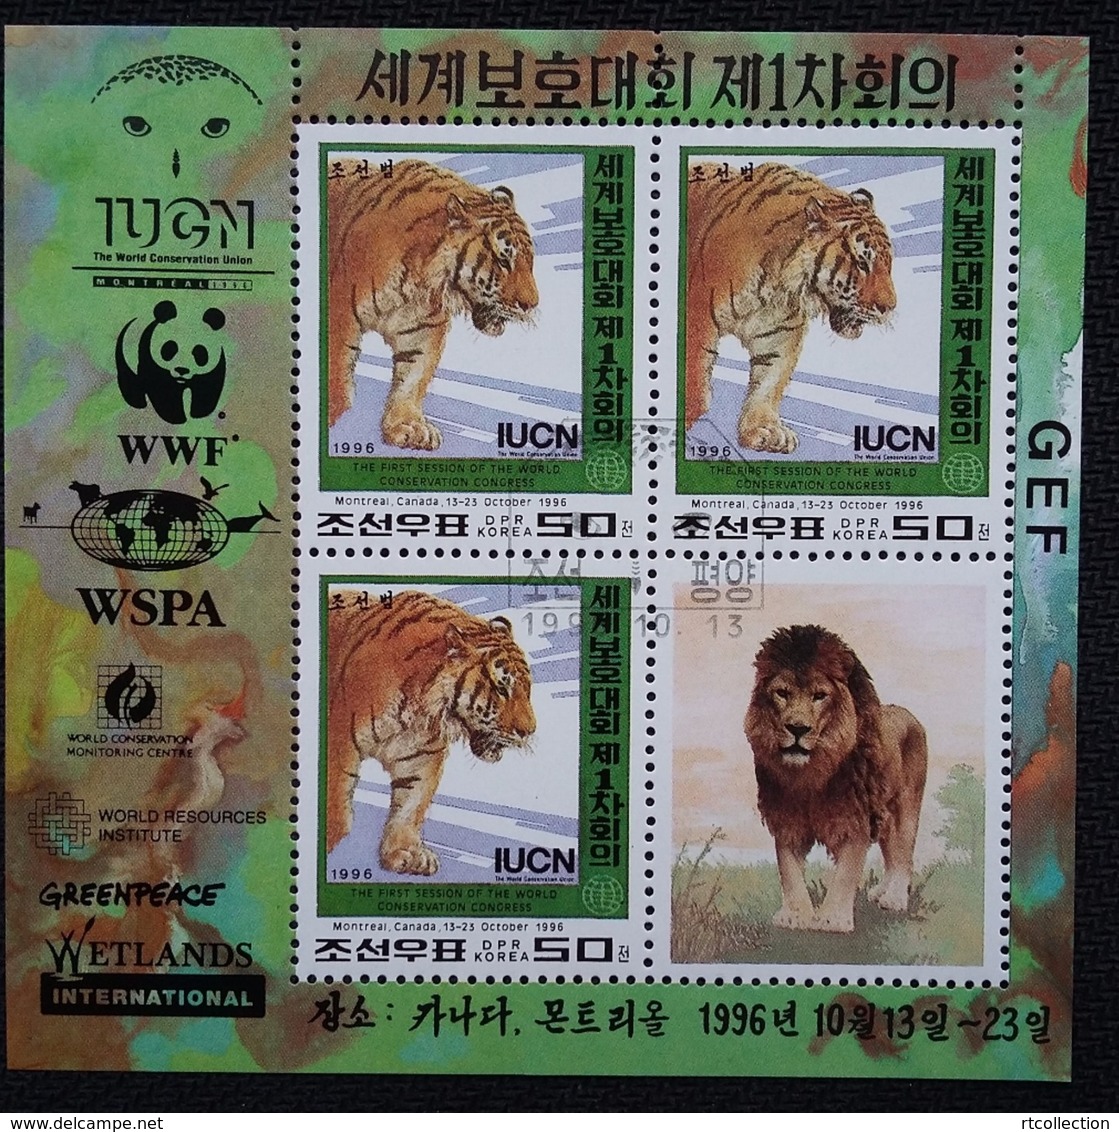 Korea 1996 M/S Wild Animals Nature Conservation Tiger Big Cats Lion Leo WWF Fauna Mammals IUCN Stamps CTO SG N3631 - Used Stamps